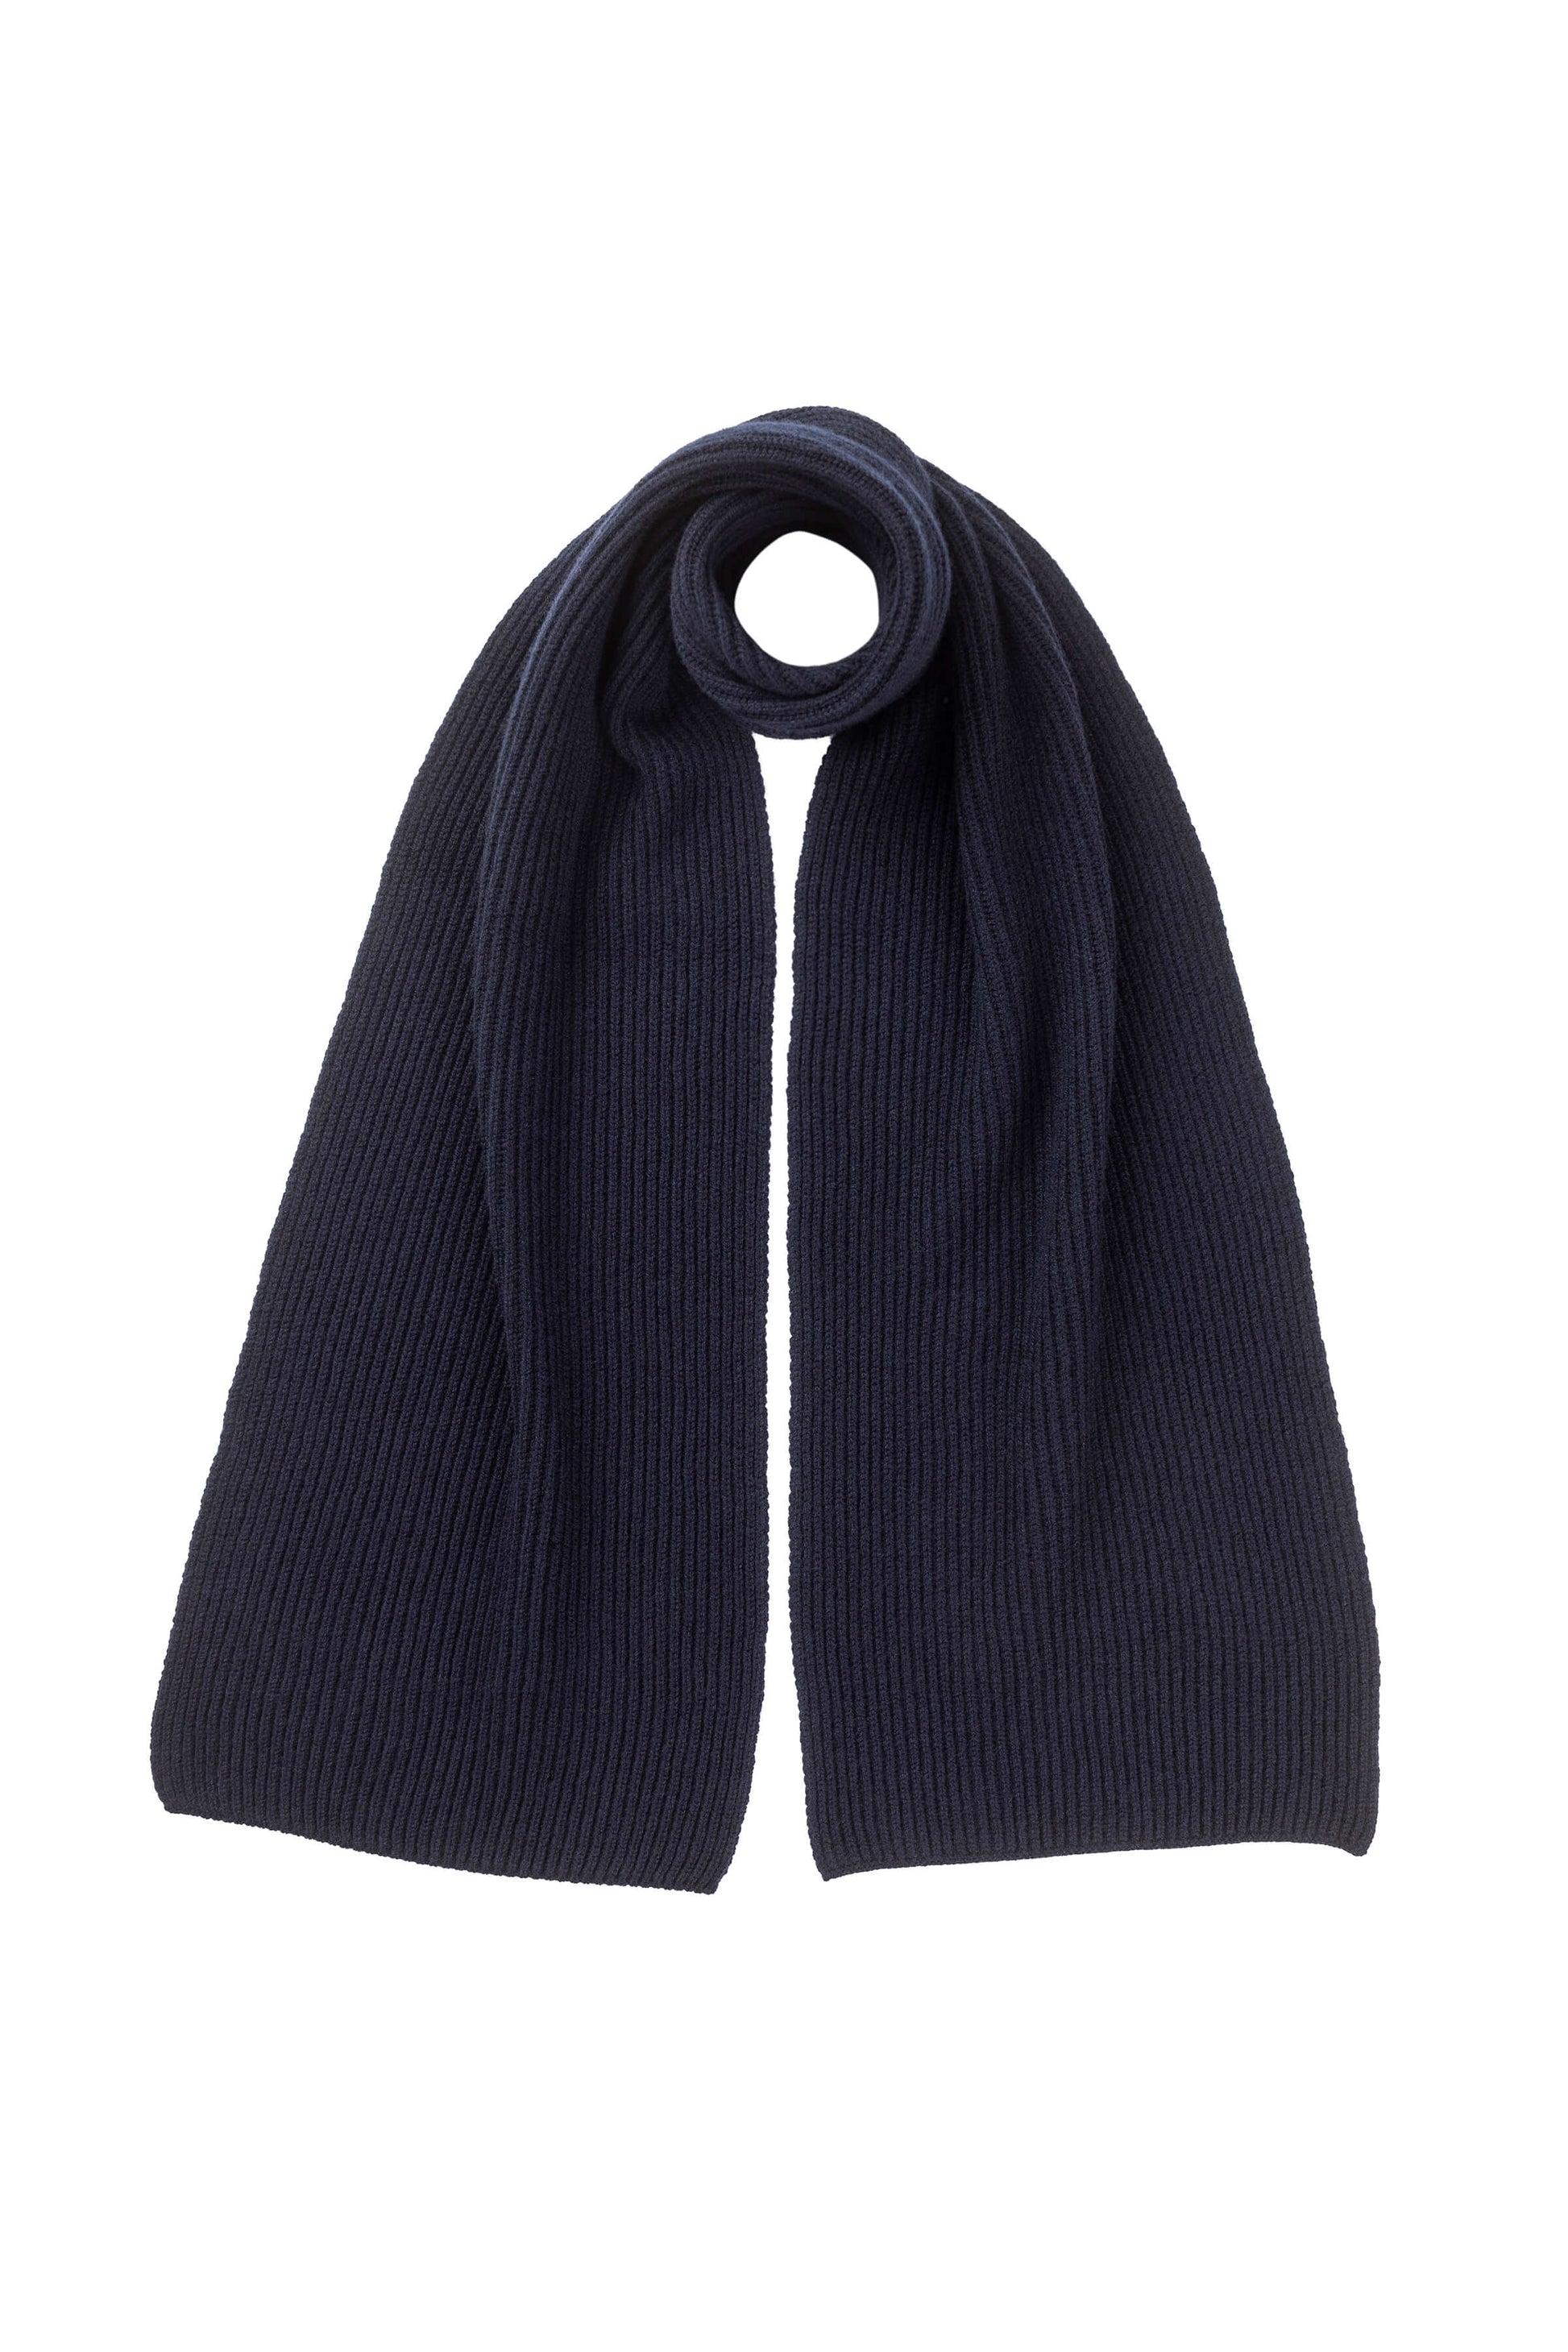 Johnstons of Elgin Knitted Accessories Navy Blue Cashmere Ribbed Scarf HAA01684SD0707ONE